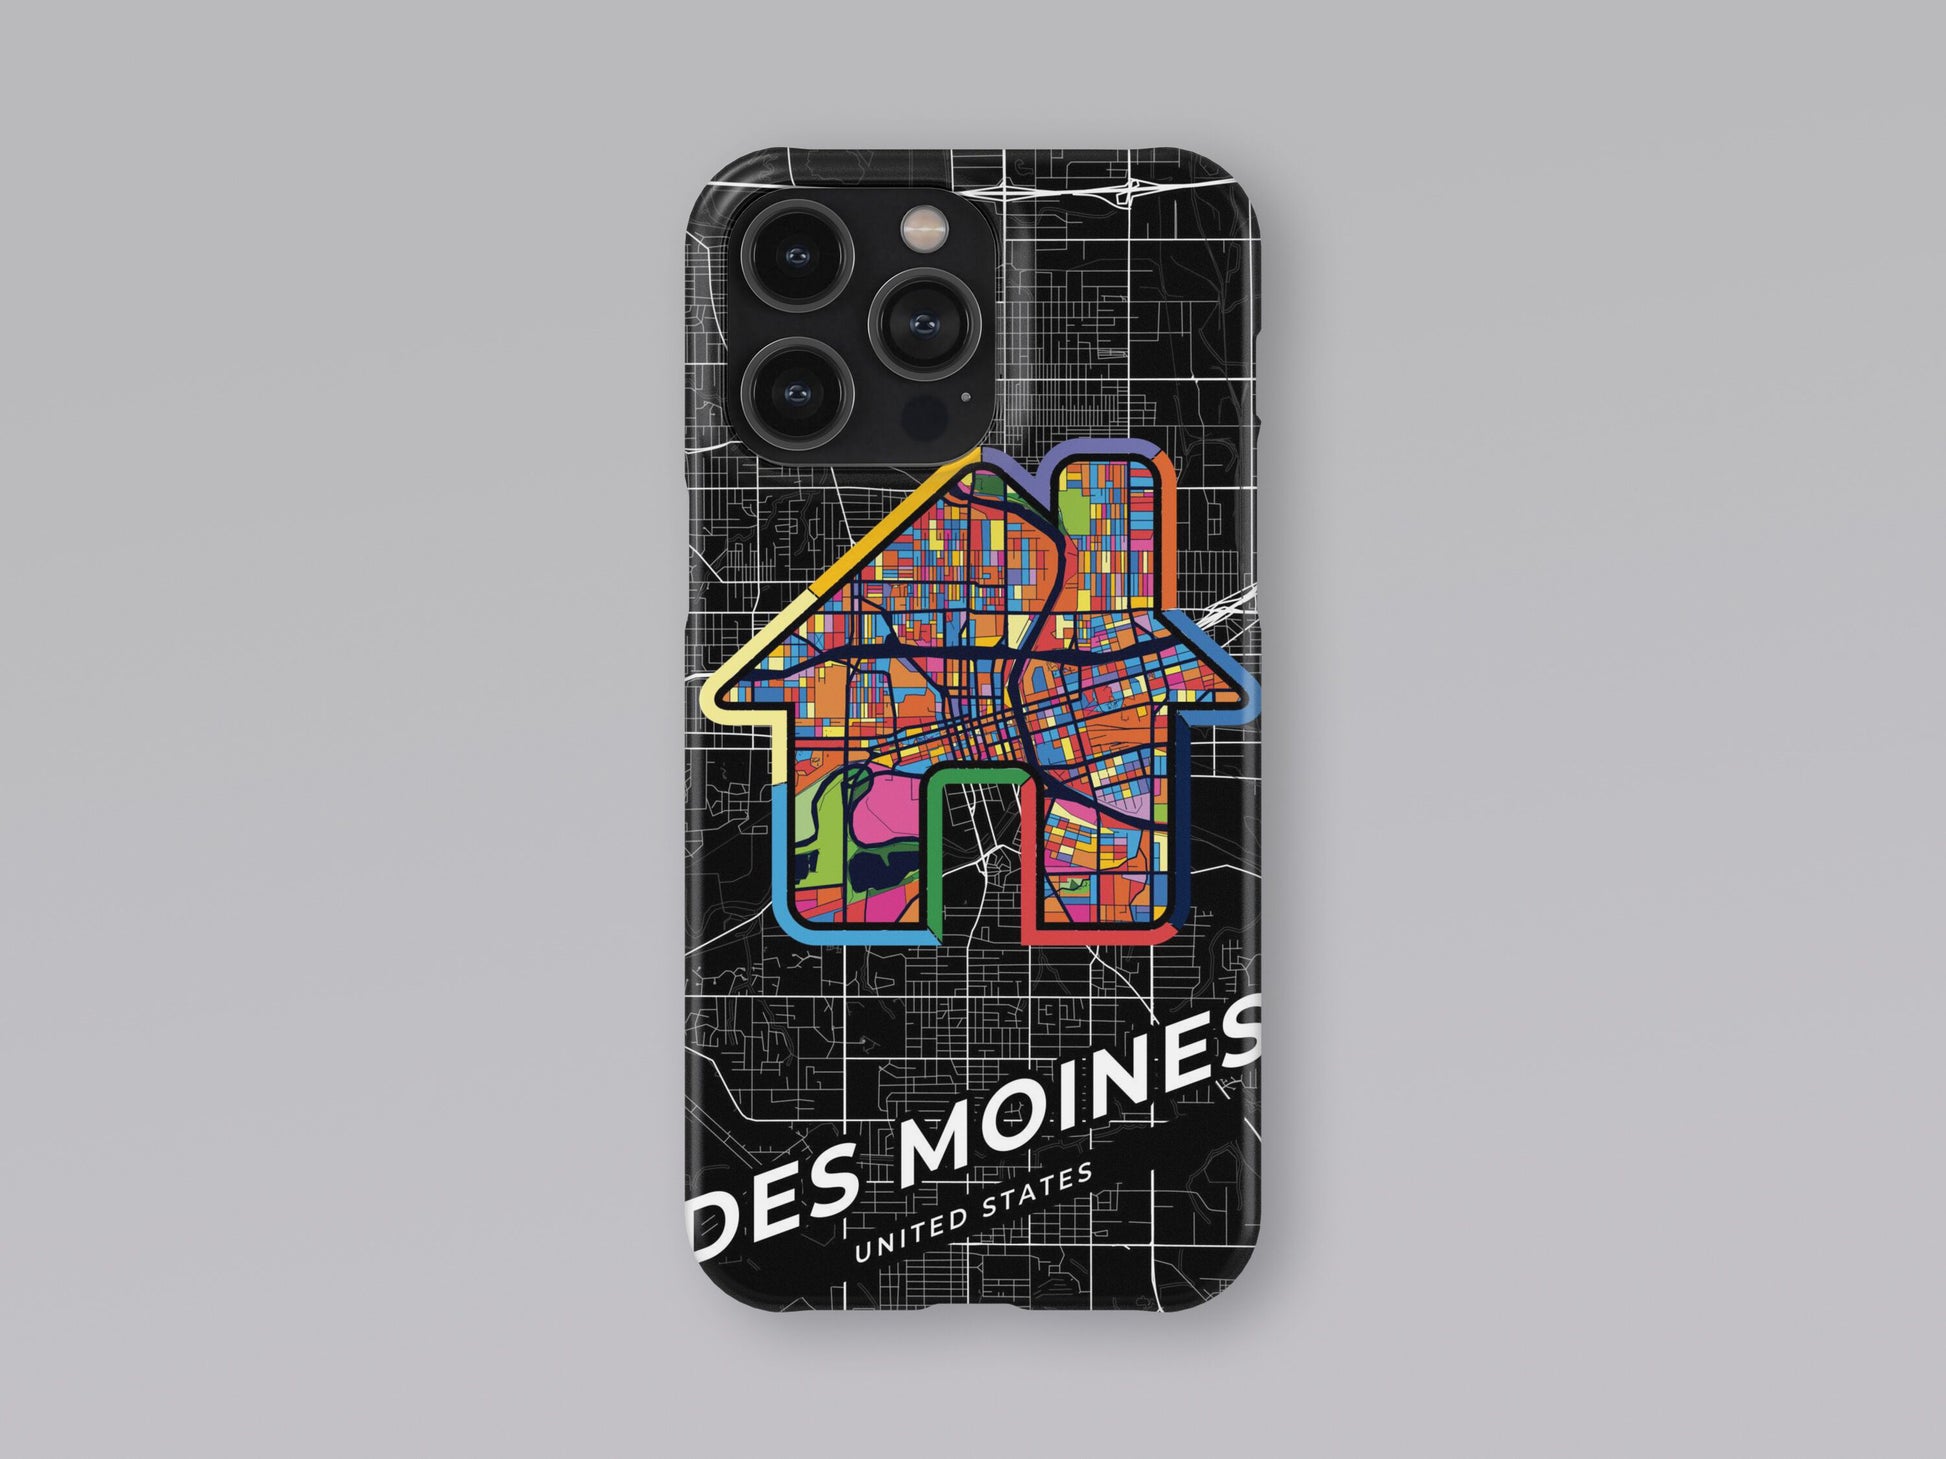 Des Moines Iowa slim phone case with colorful icon. Birthday, wedding or housewarming gift. Couple match cases. 3